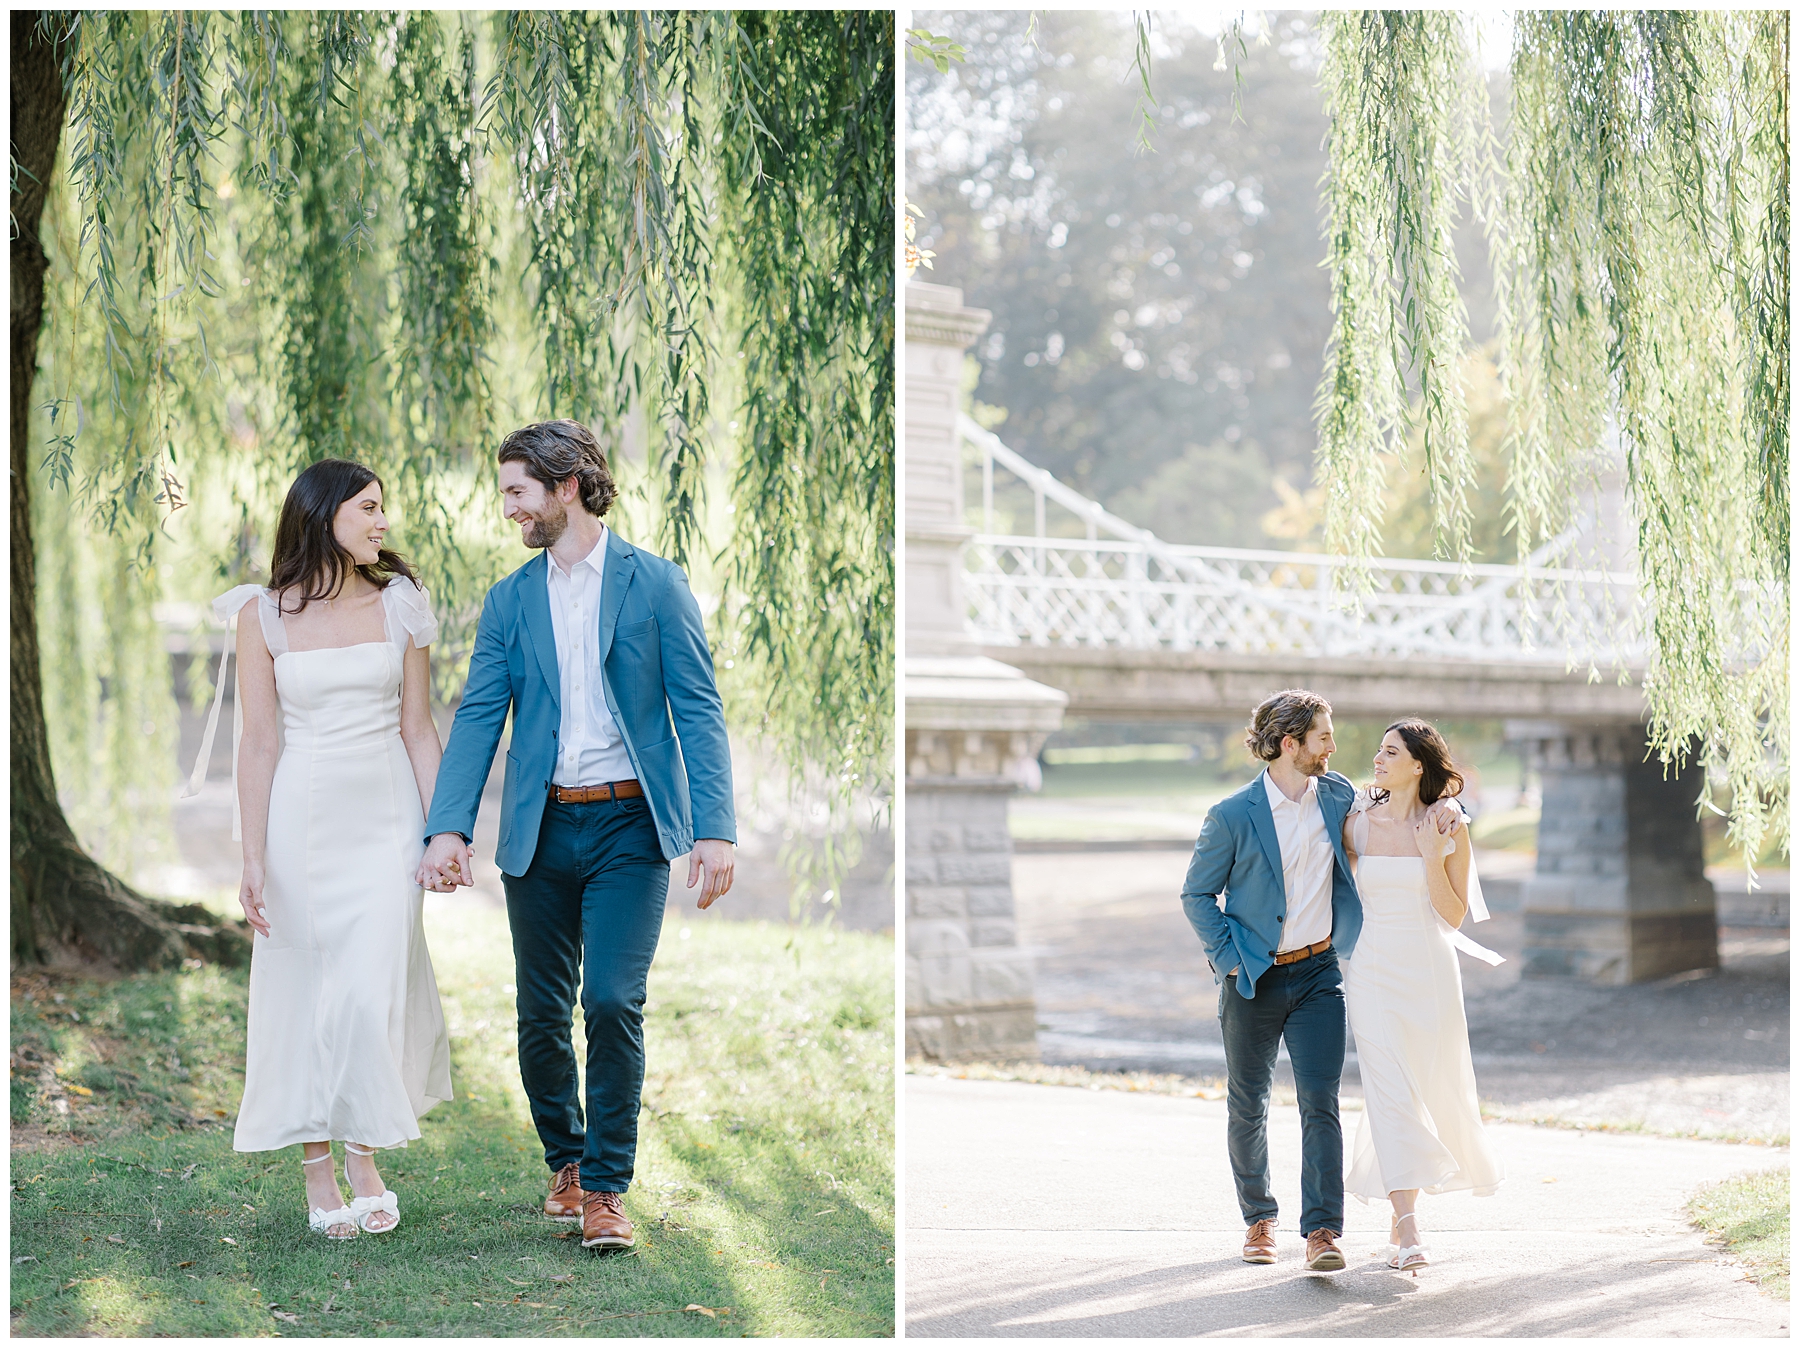 Romantic Engagement Session in Boston under weeping willow tree